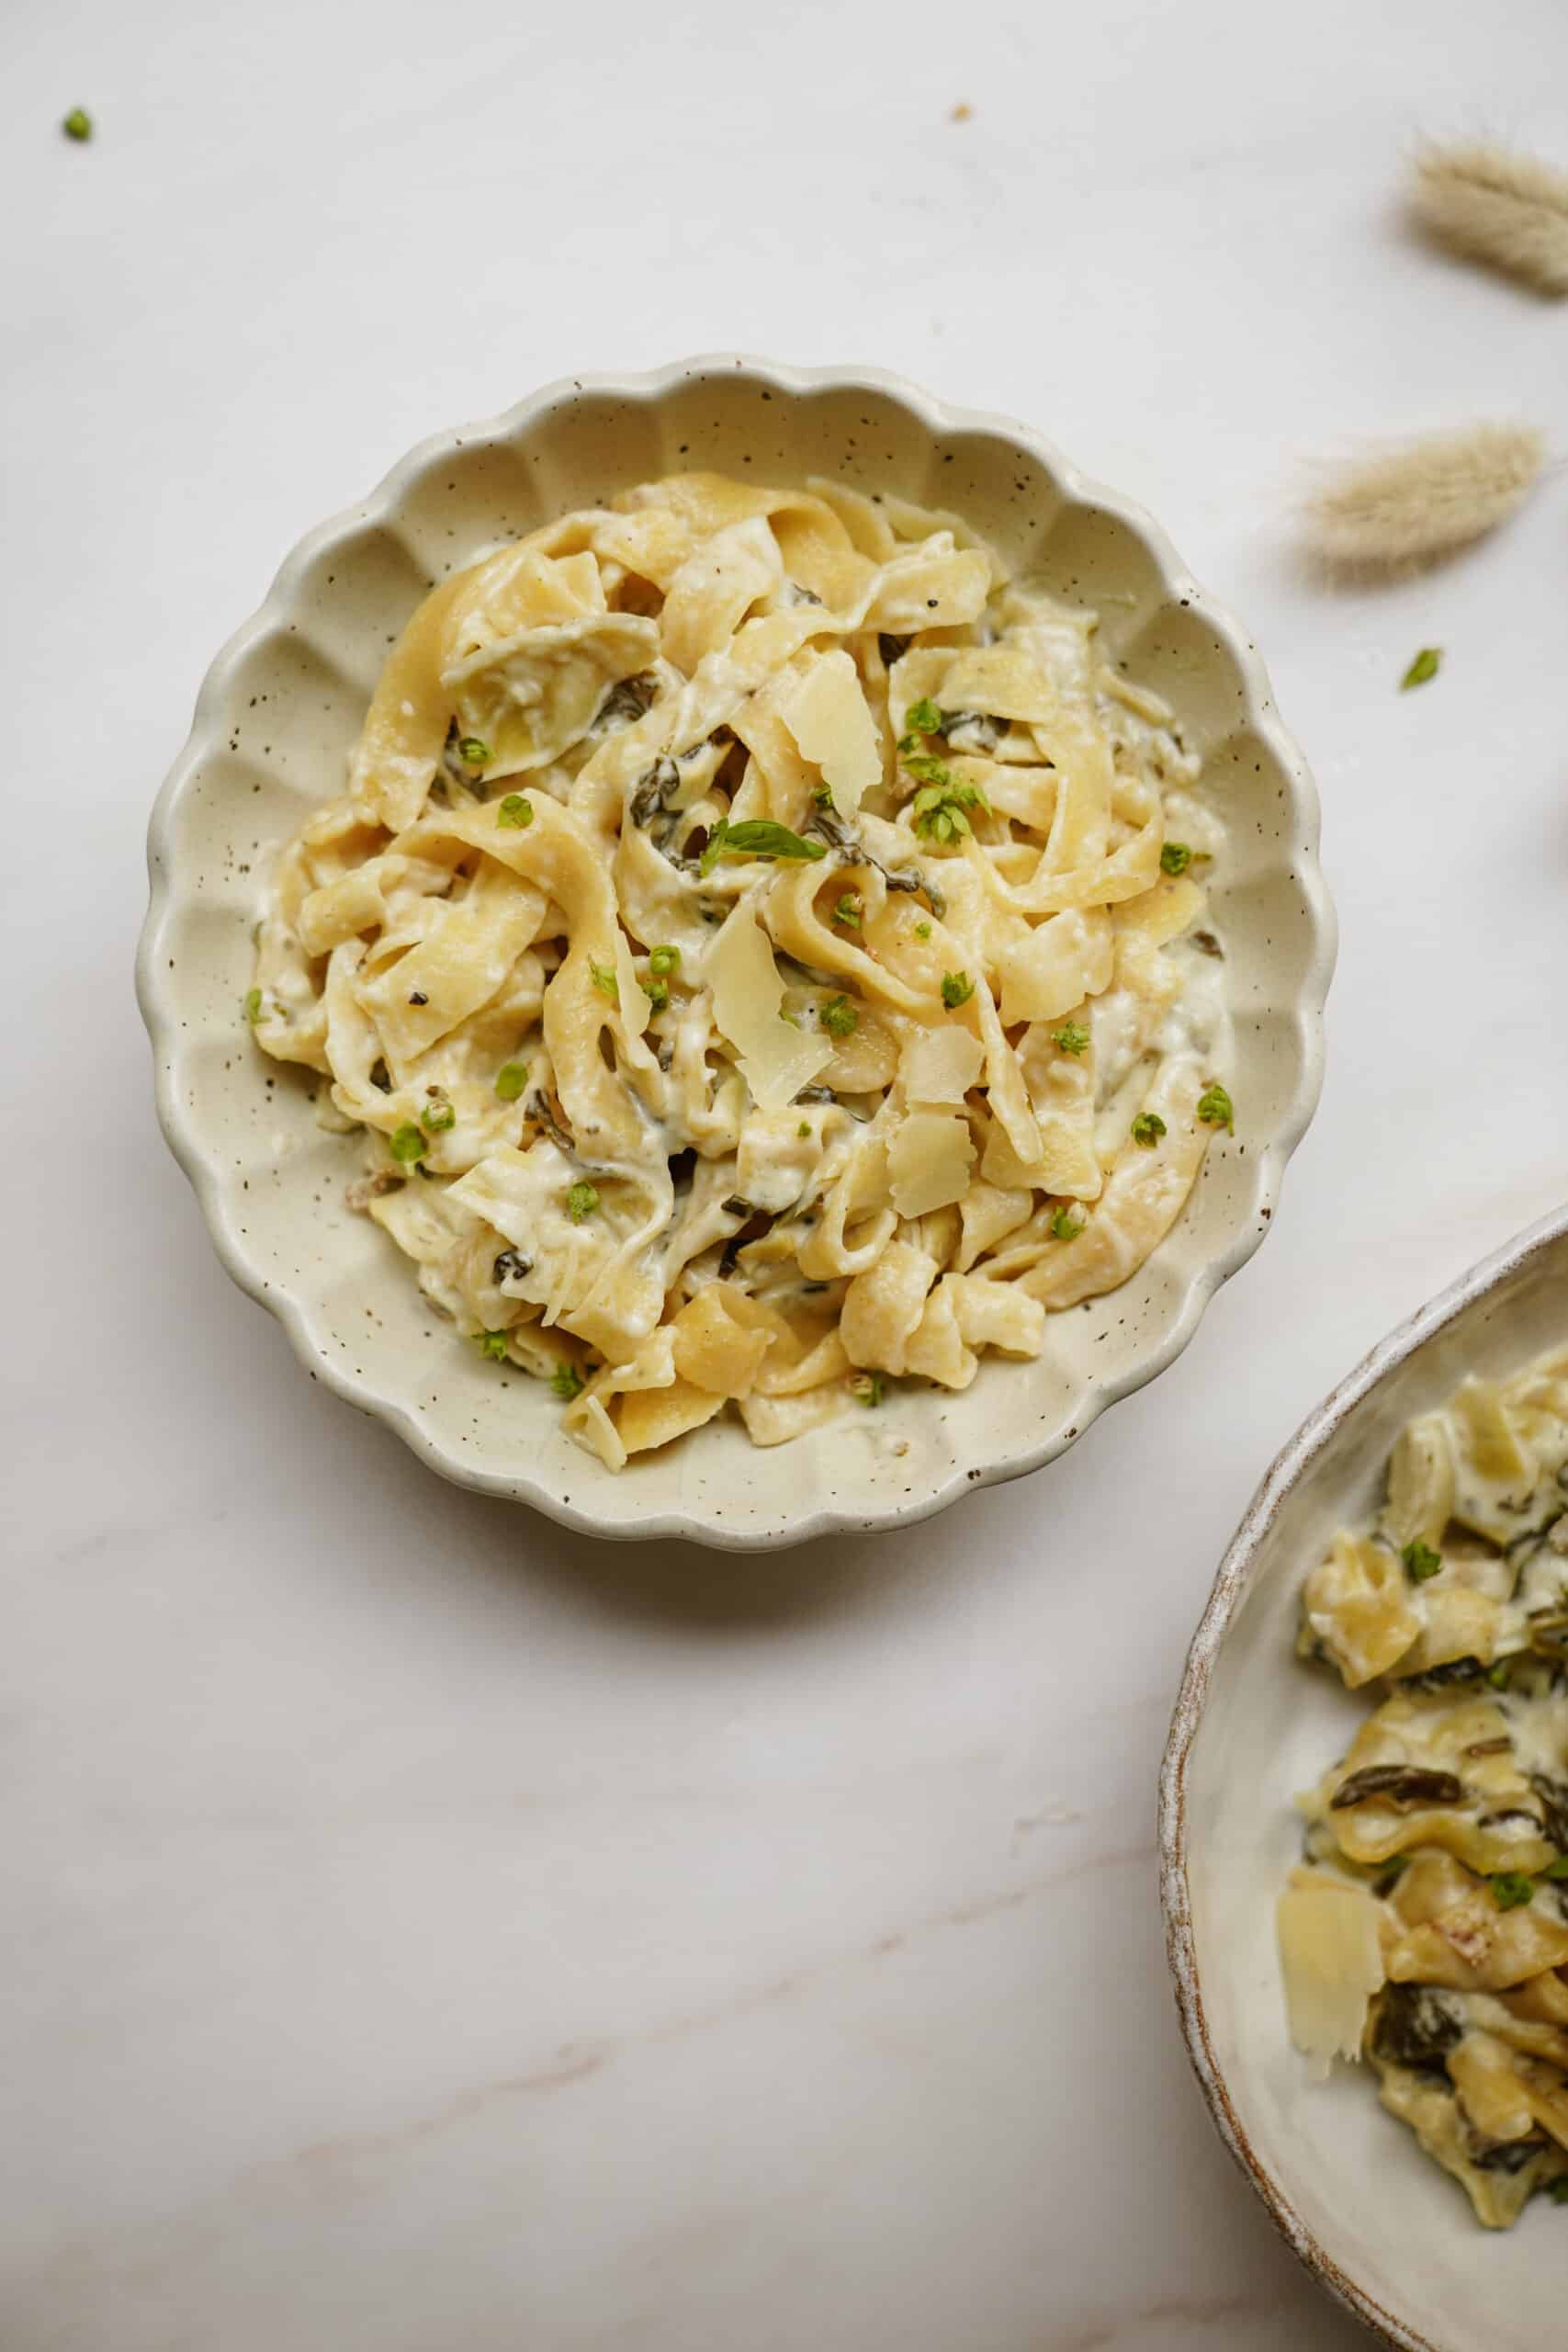 Spinach and artichoke pasta on white plates